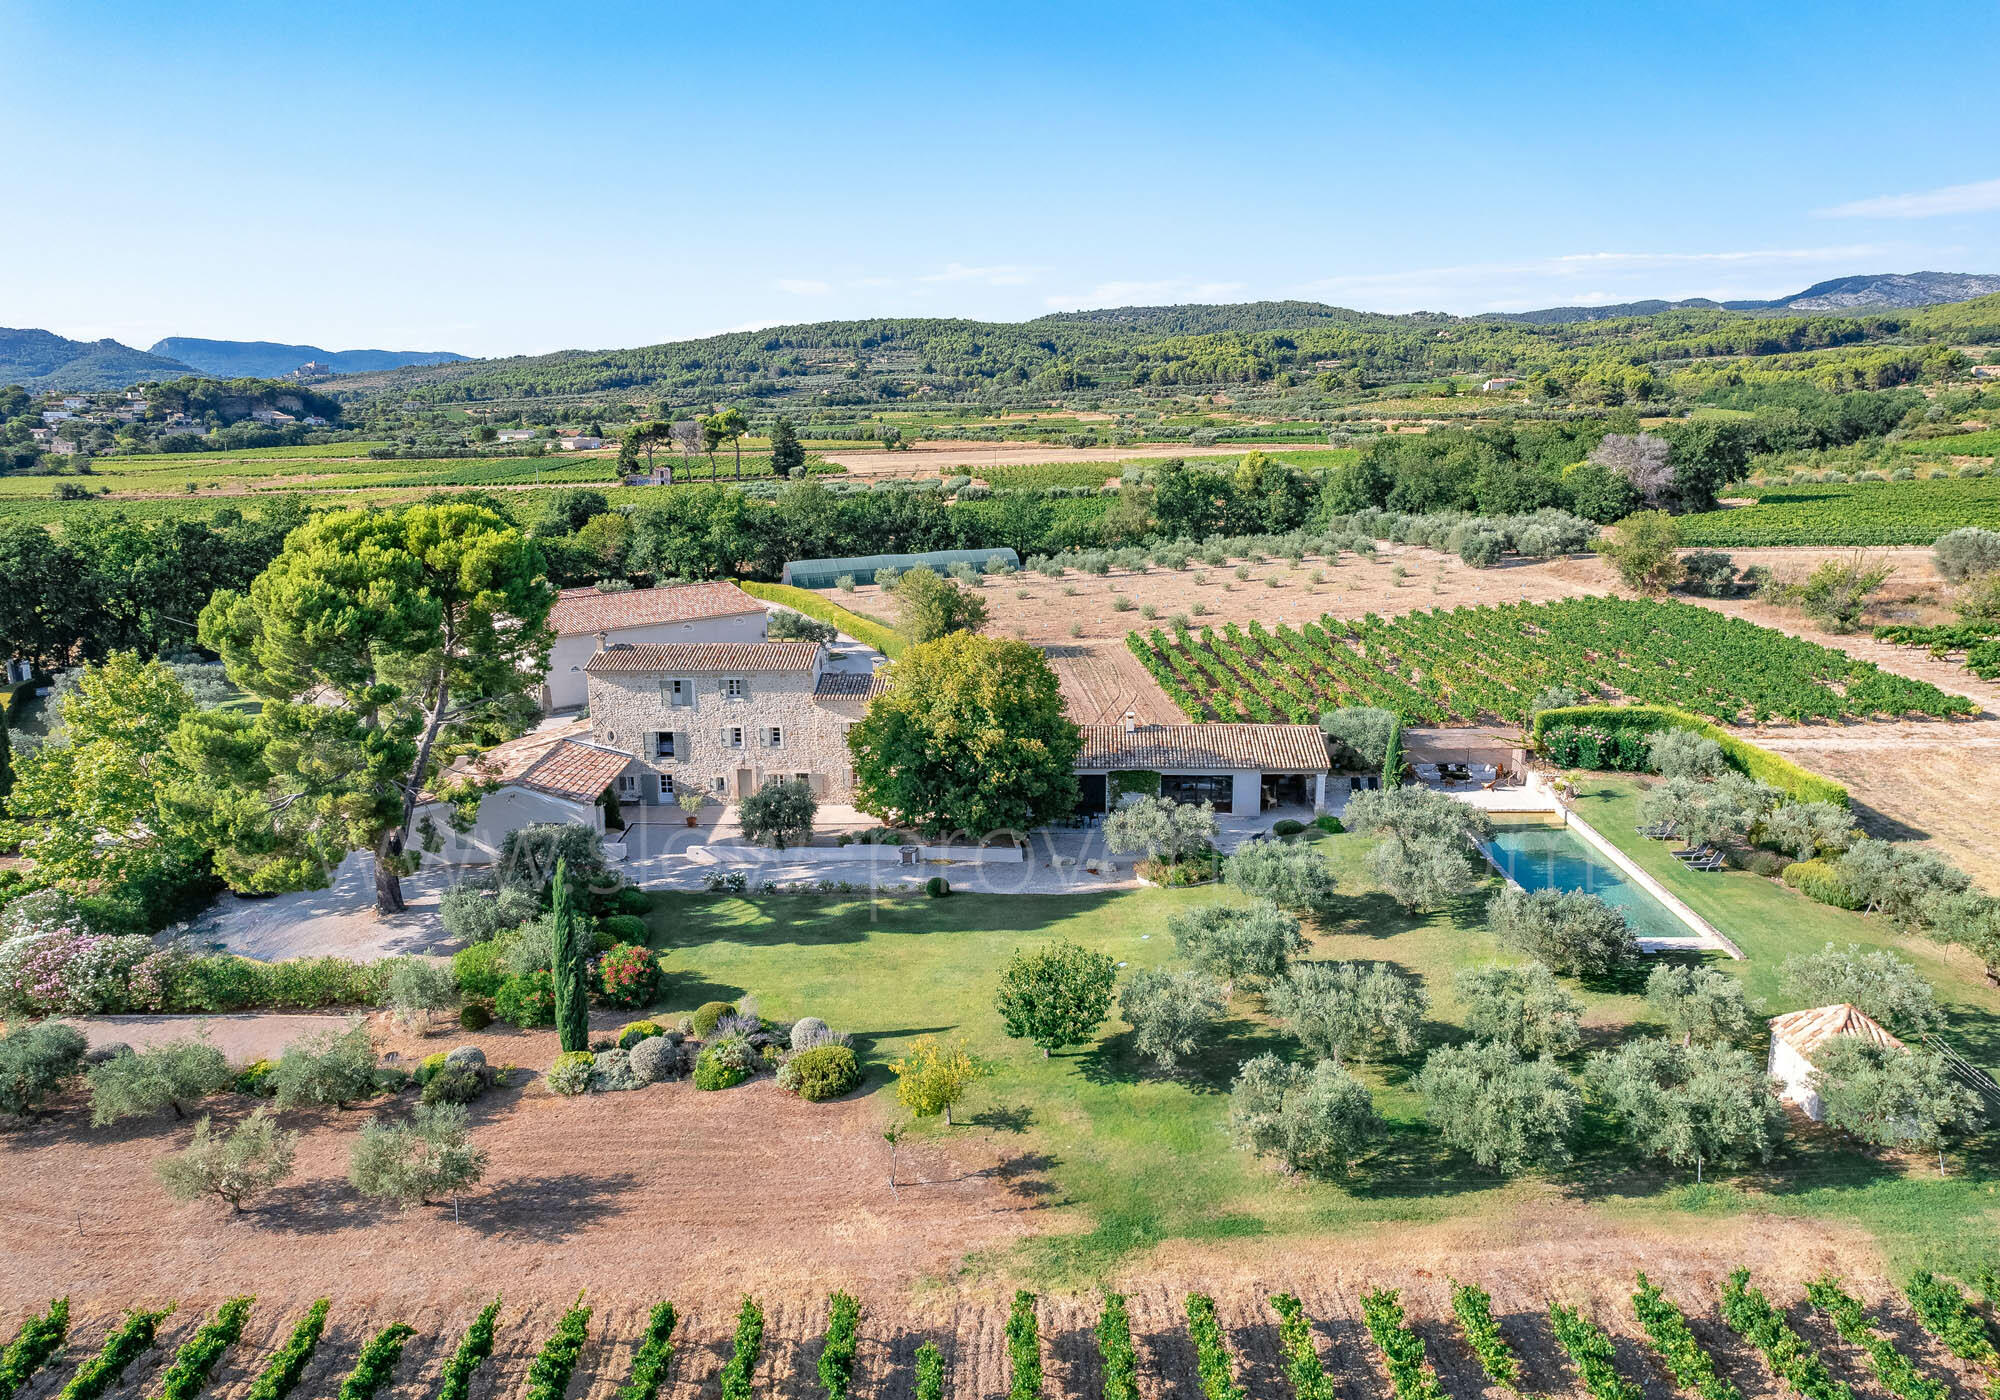 A beautiful property surrounded by vineyards at the foot of Mont Ventoux, Provence